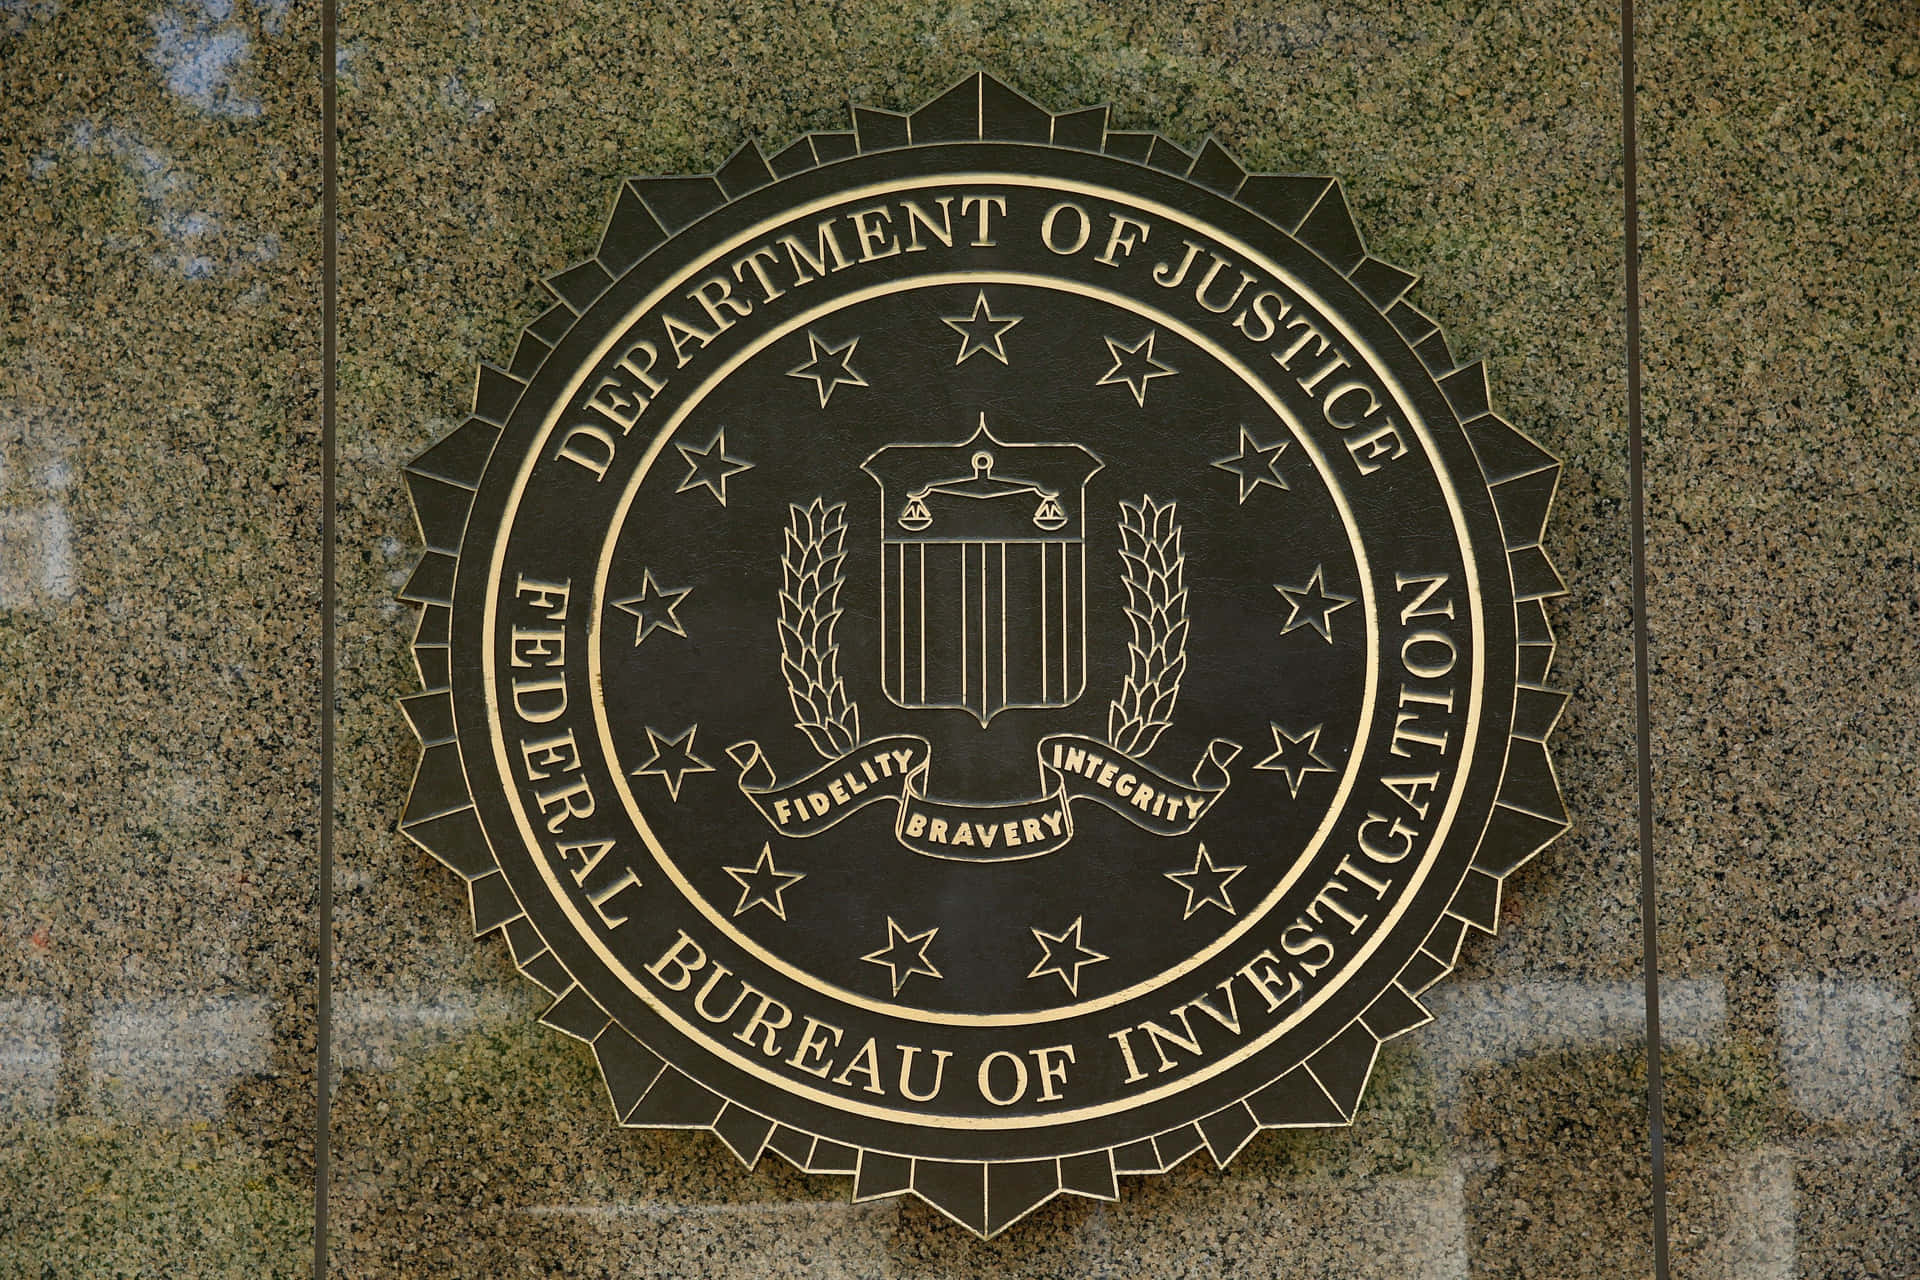 The Fbi Logo Is On The Wall Of A Building